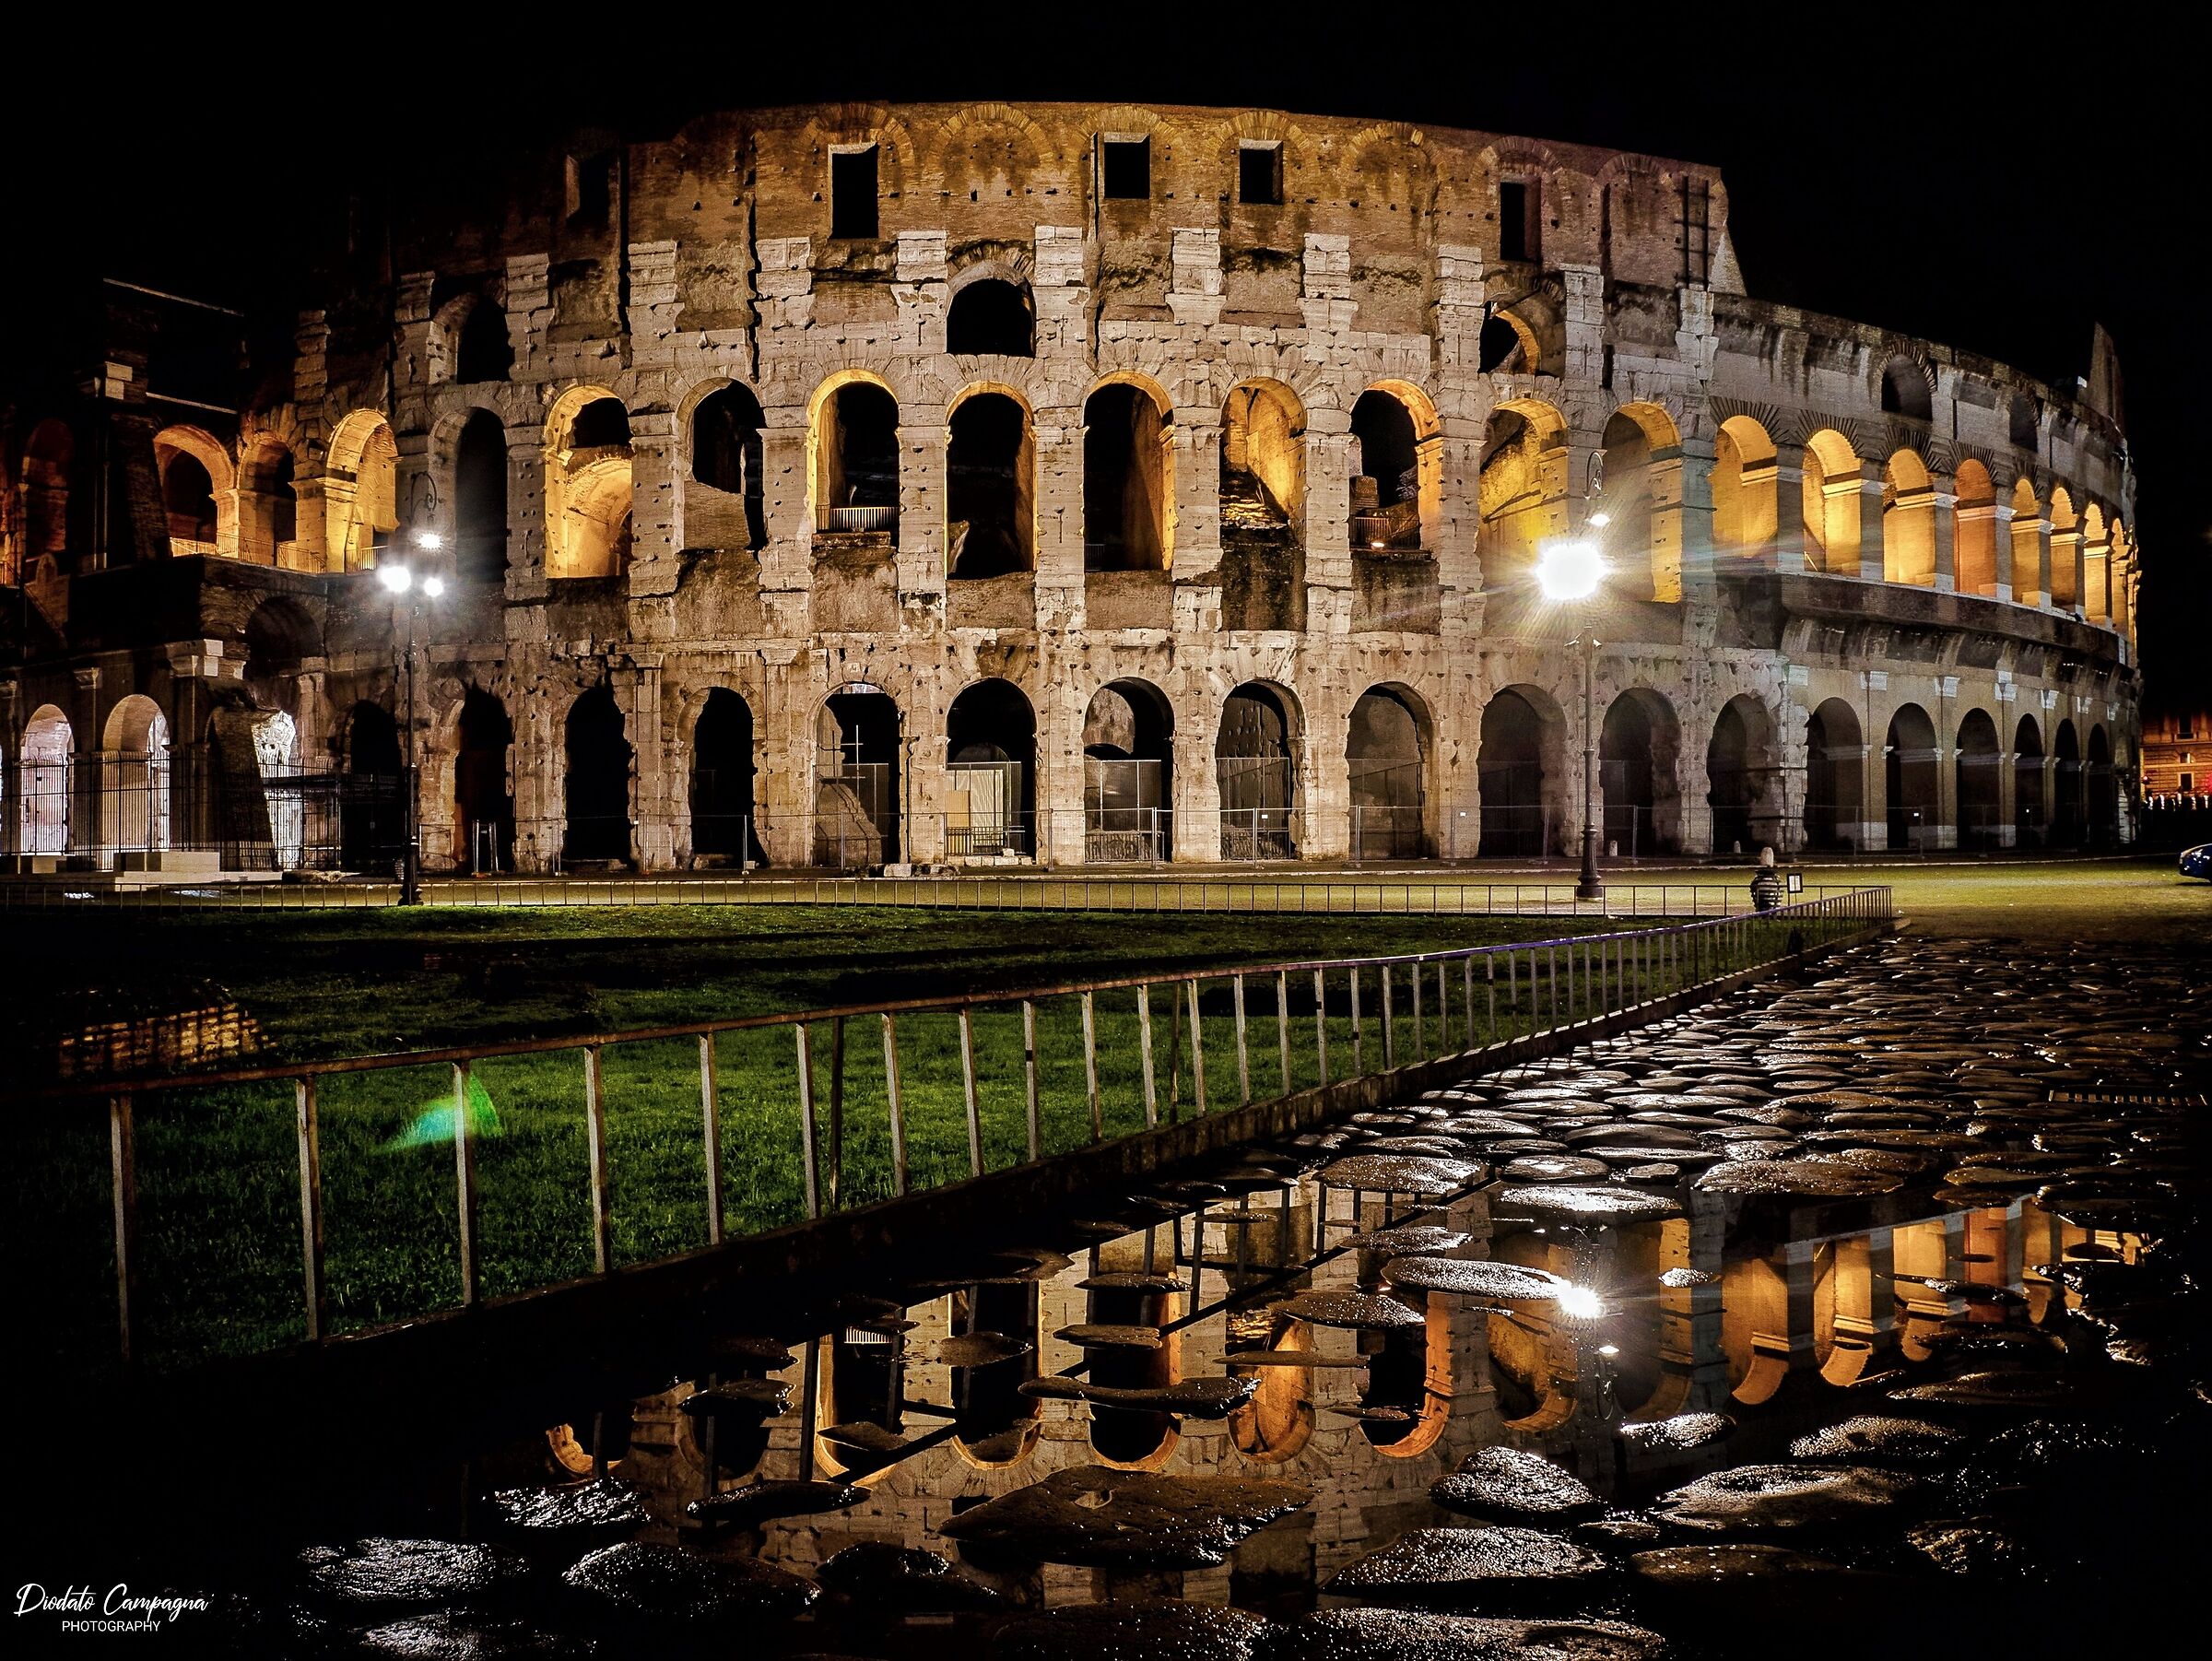 The Colosseum at night...